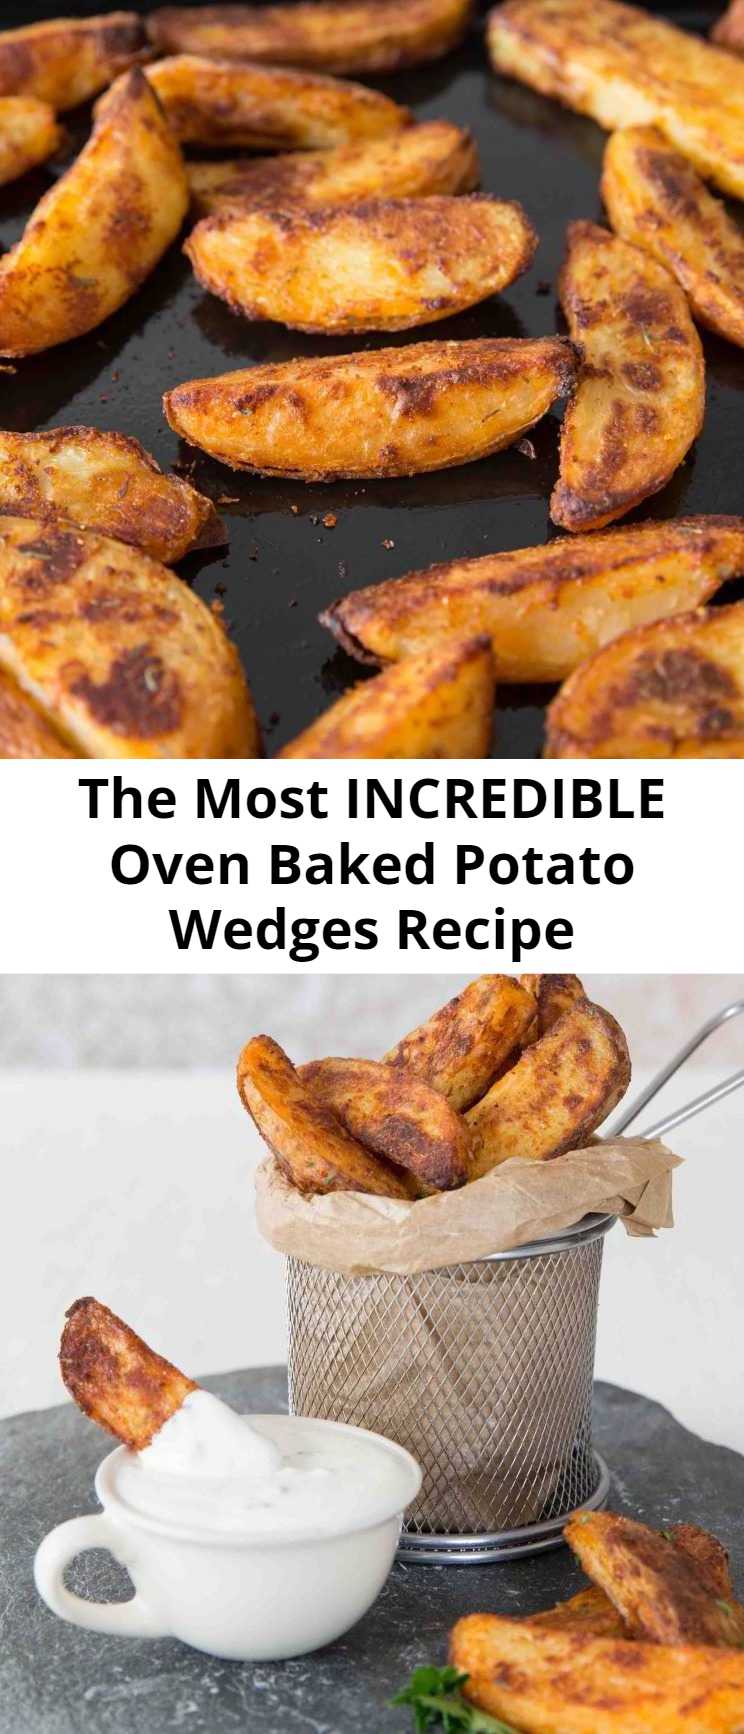 The Most INCREDIBLE Oven Baked Potato Wedges Recipe - Here I share with you a some game changing tips to getting Oven Baked Potato Wedges that are crispy and crunchy on the outside, yet light and fluffy on the inside! #wedges #fingerfood #potatowedges #appetizers